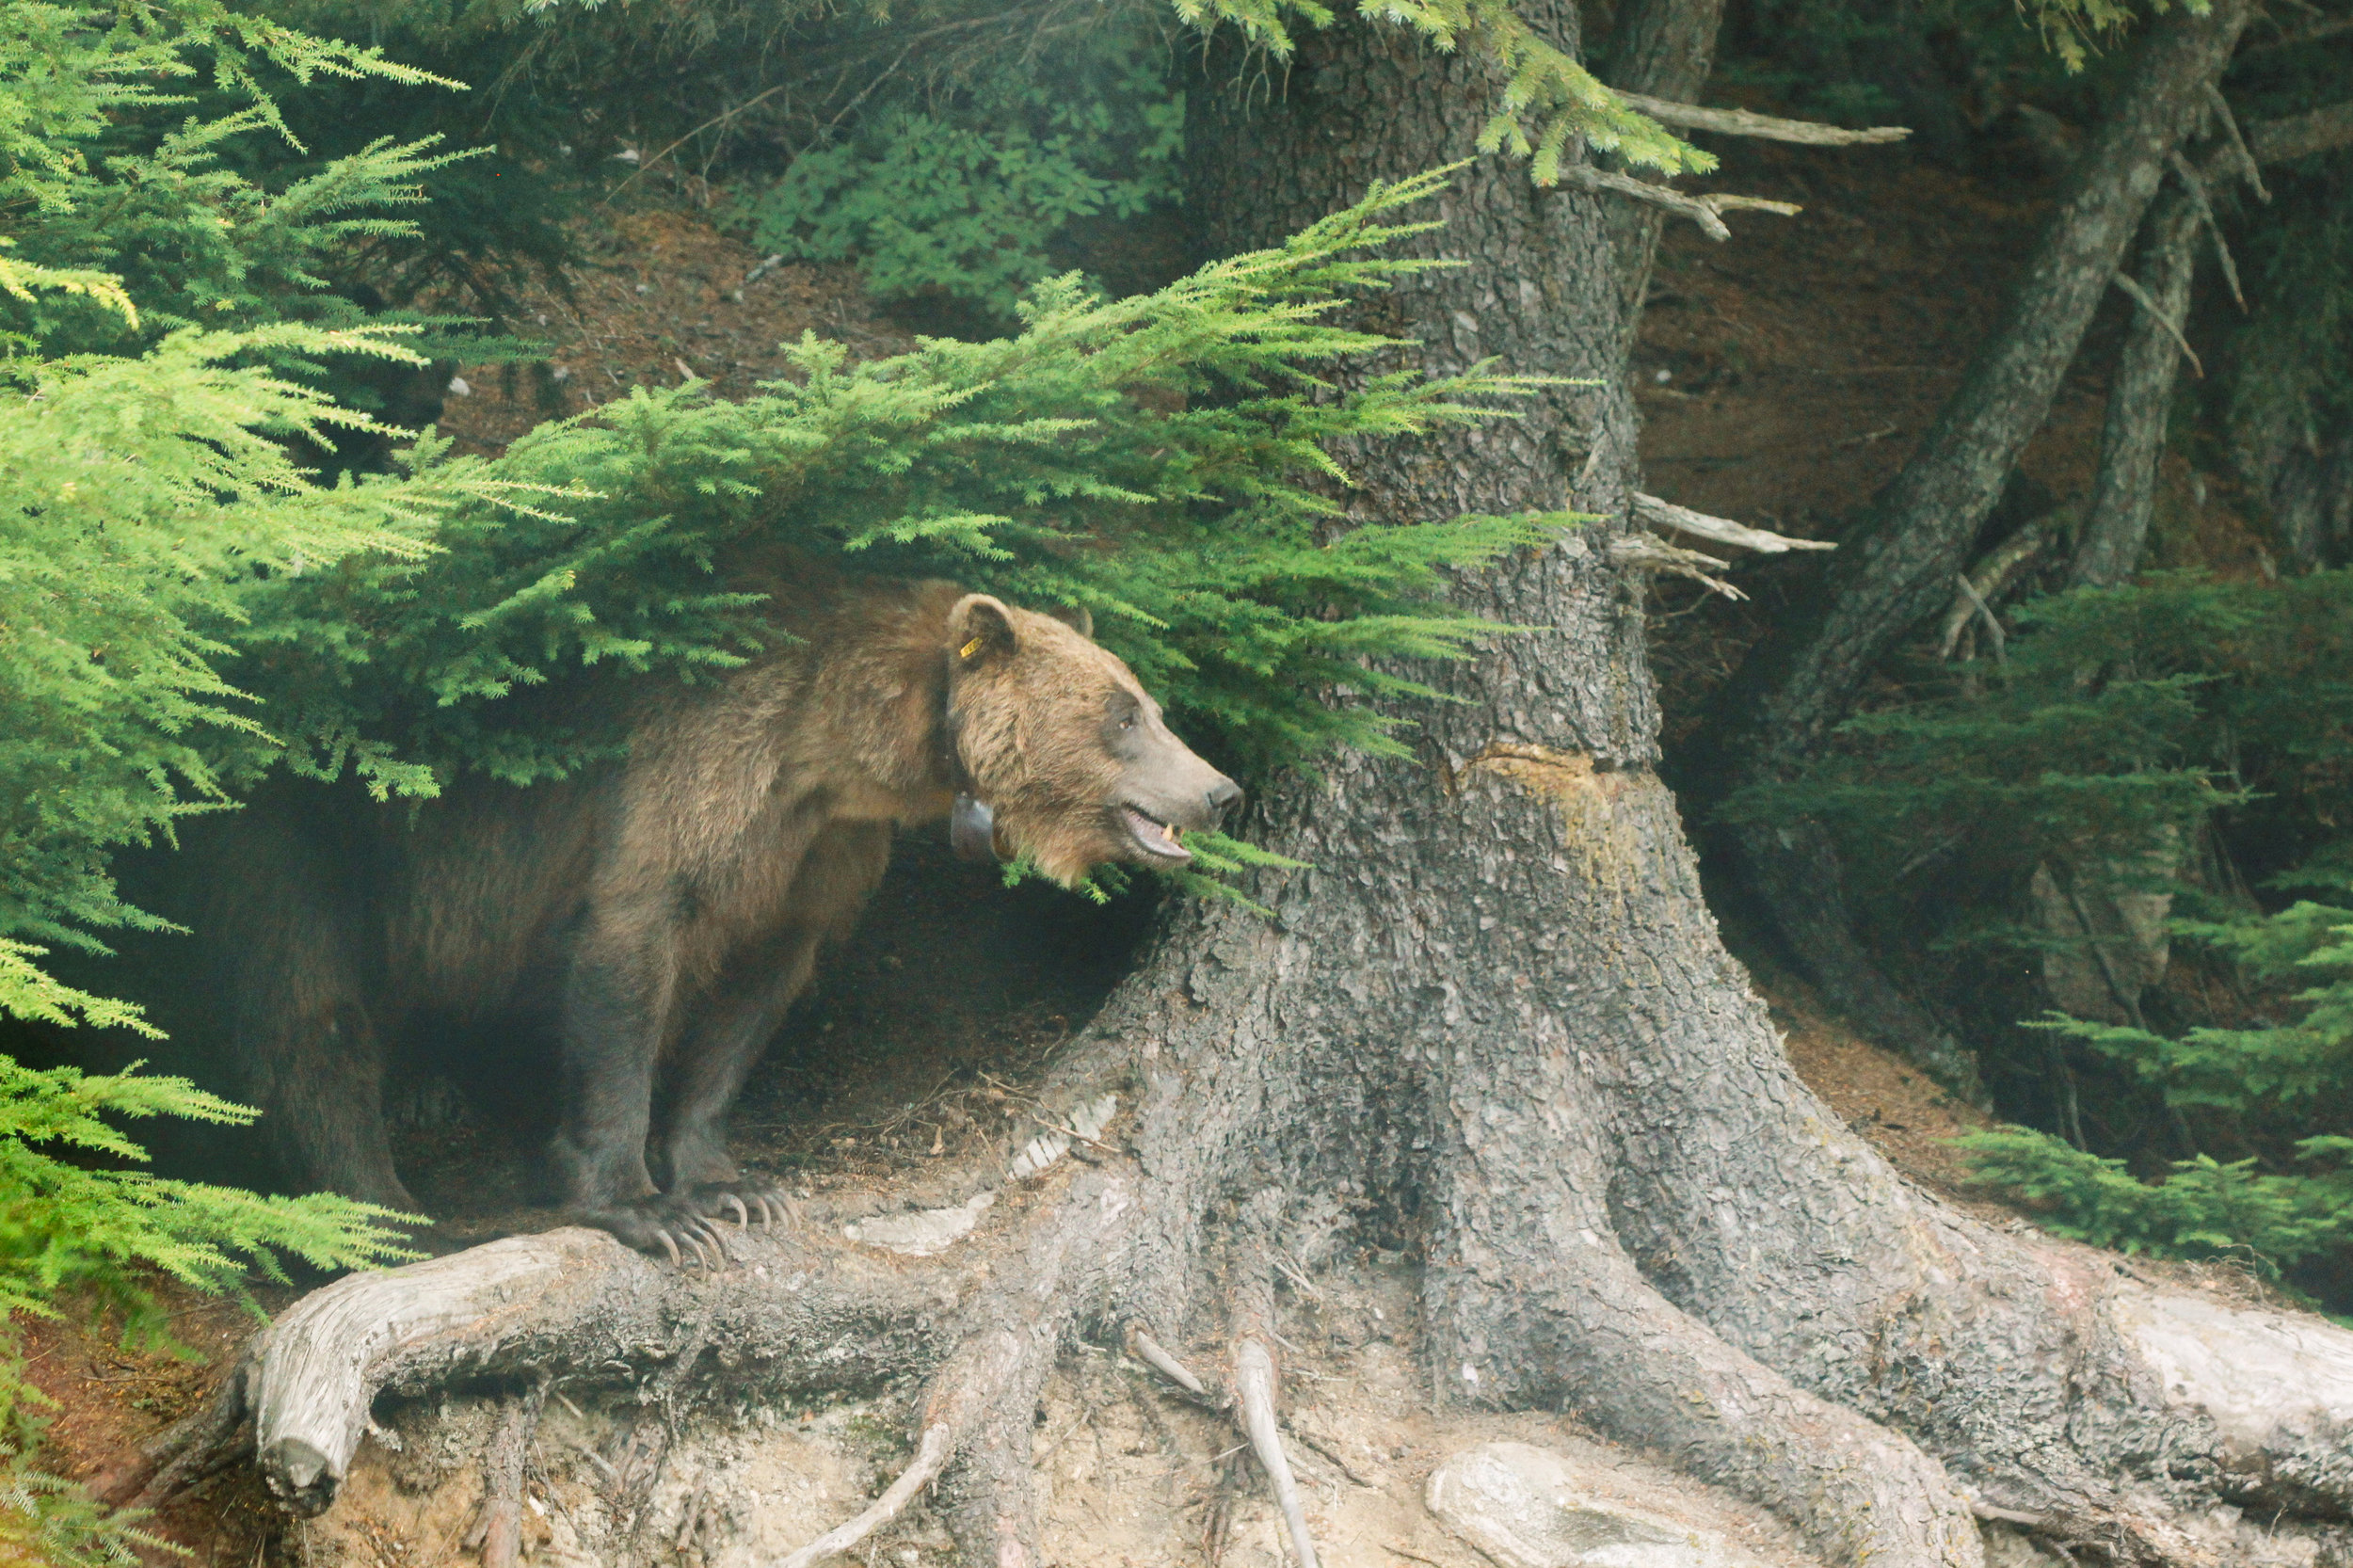 Grizzly Bear in Haines, Alaska Travel Blog | MALLORIE OWENS